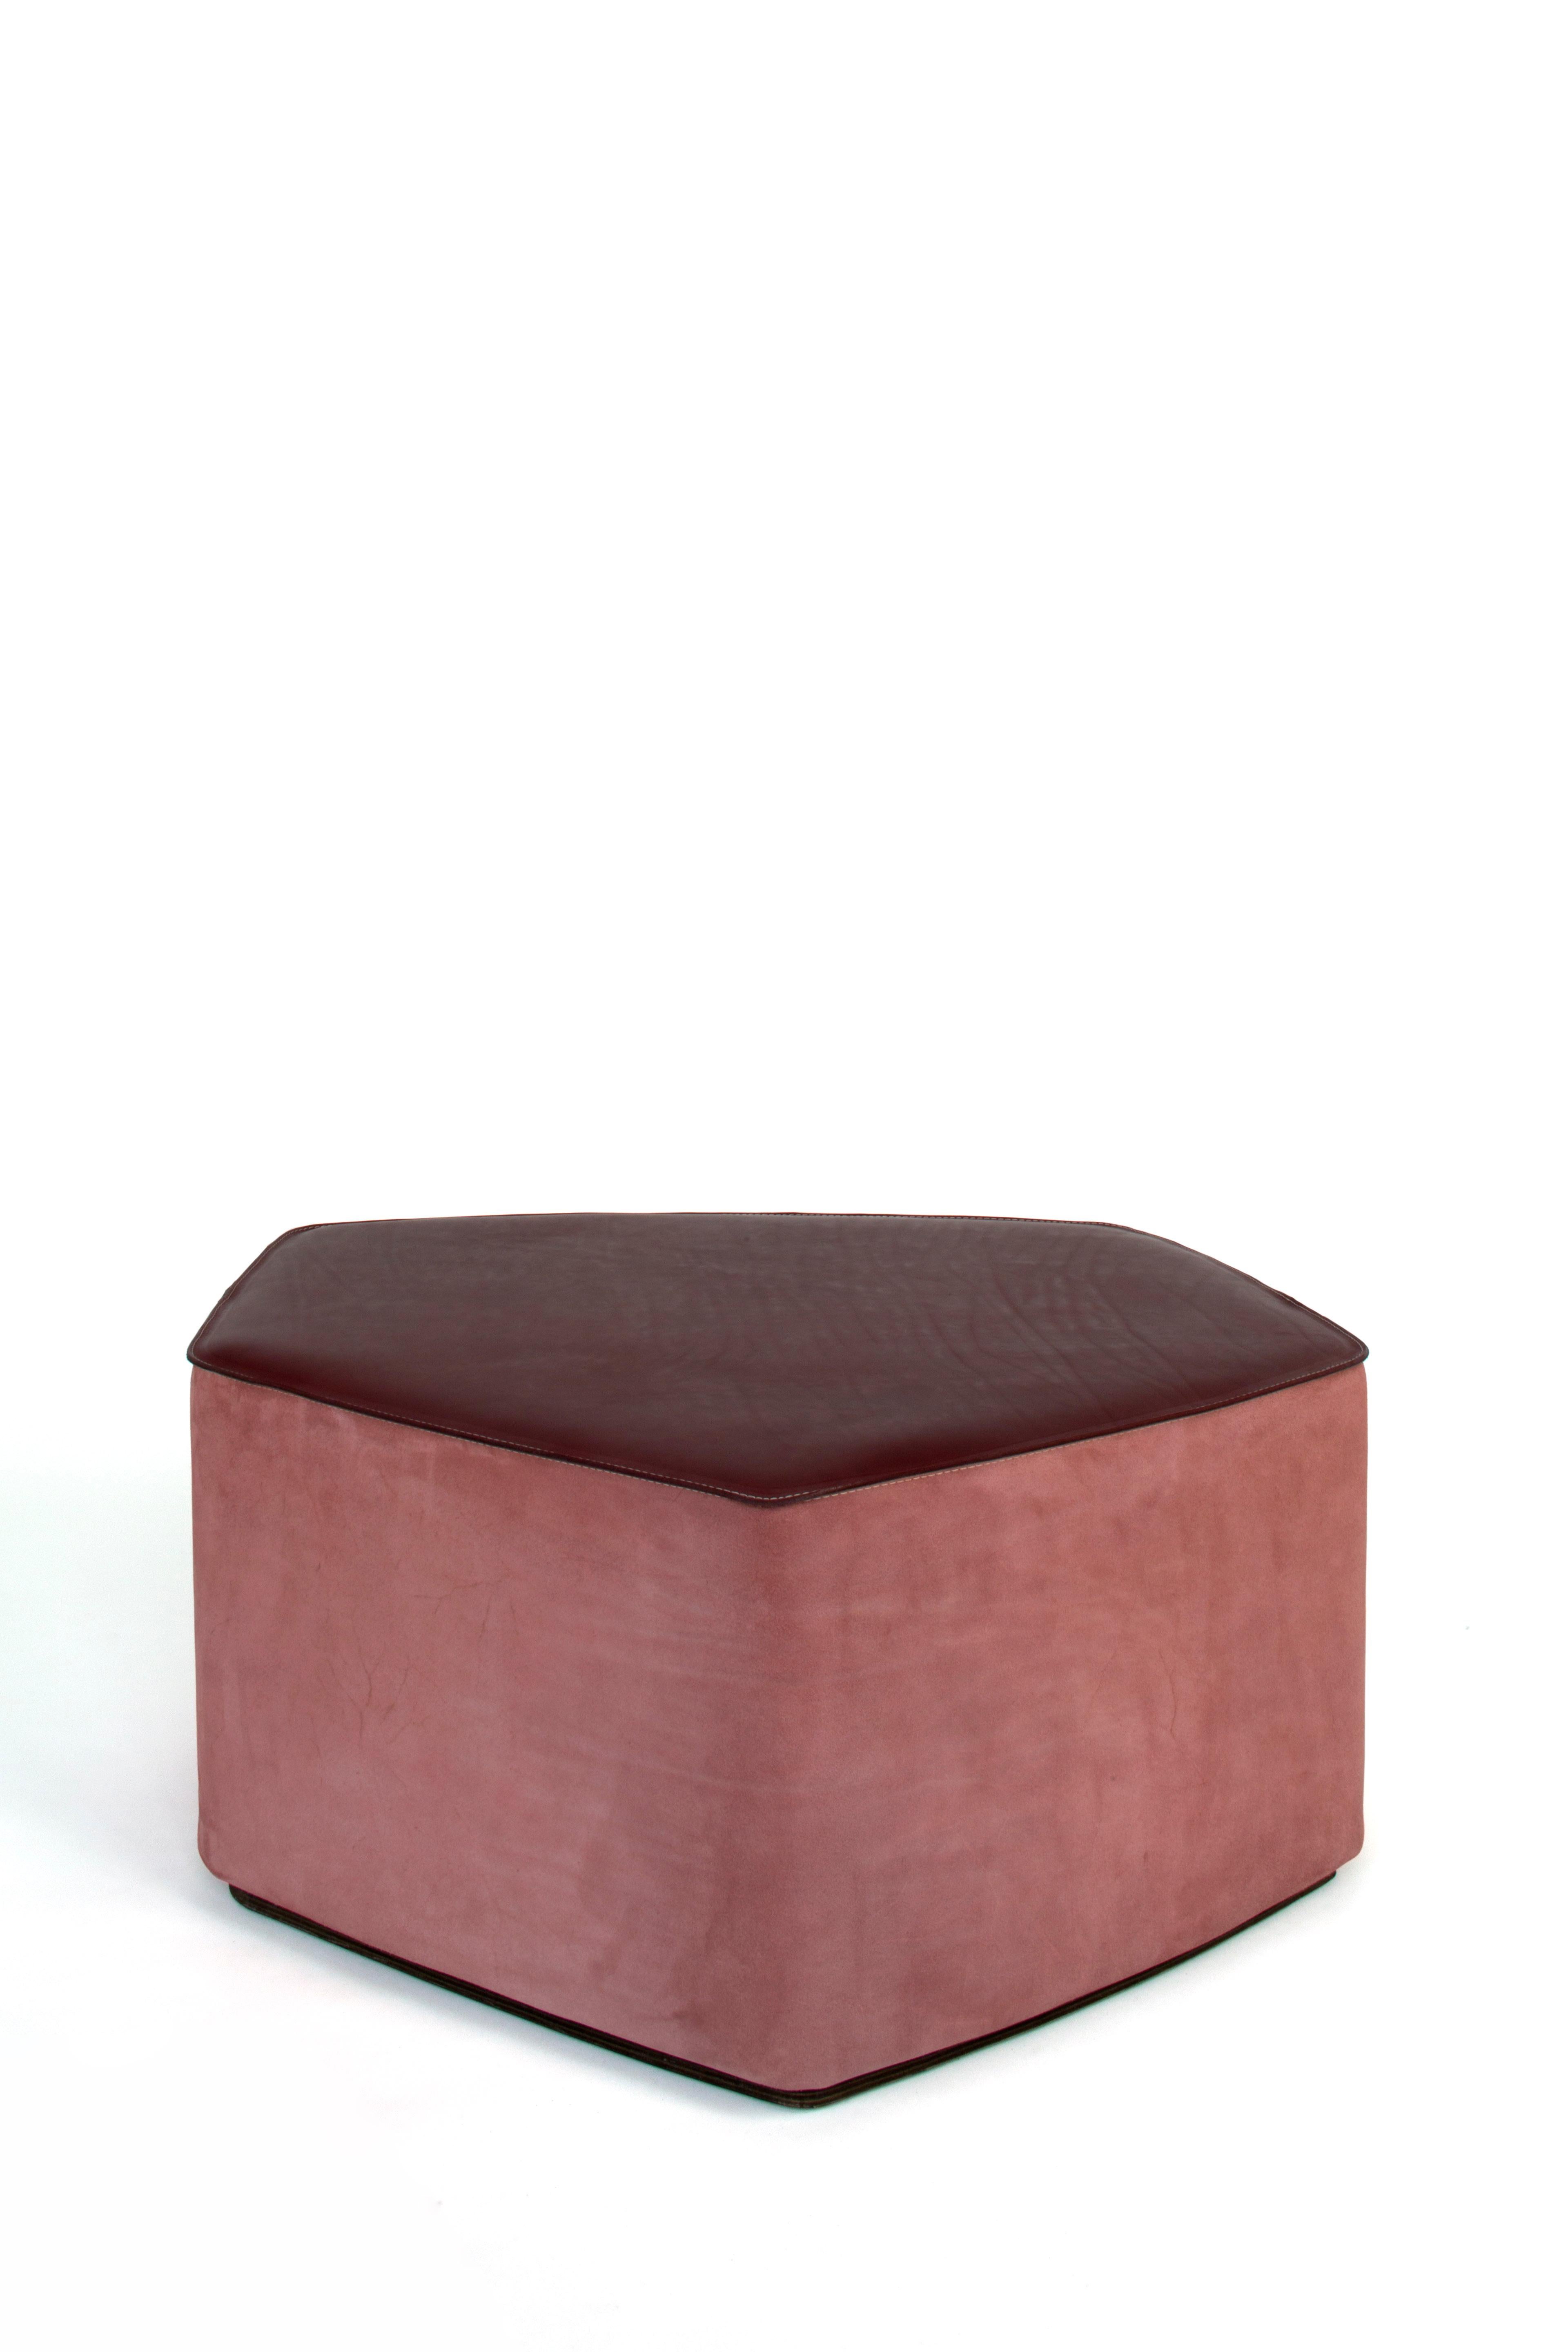 Set of 3 Pouf! Leather Stools by Nestor Perkal For Sale 2